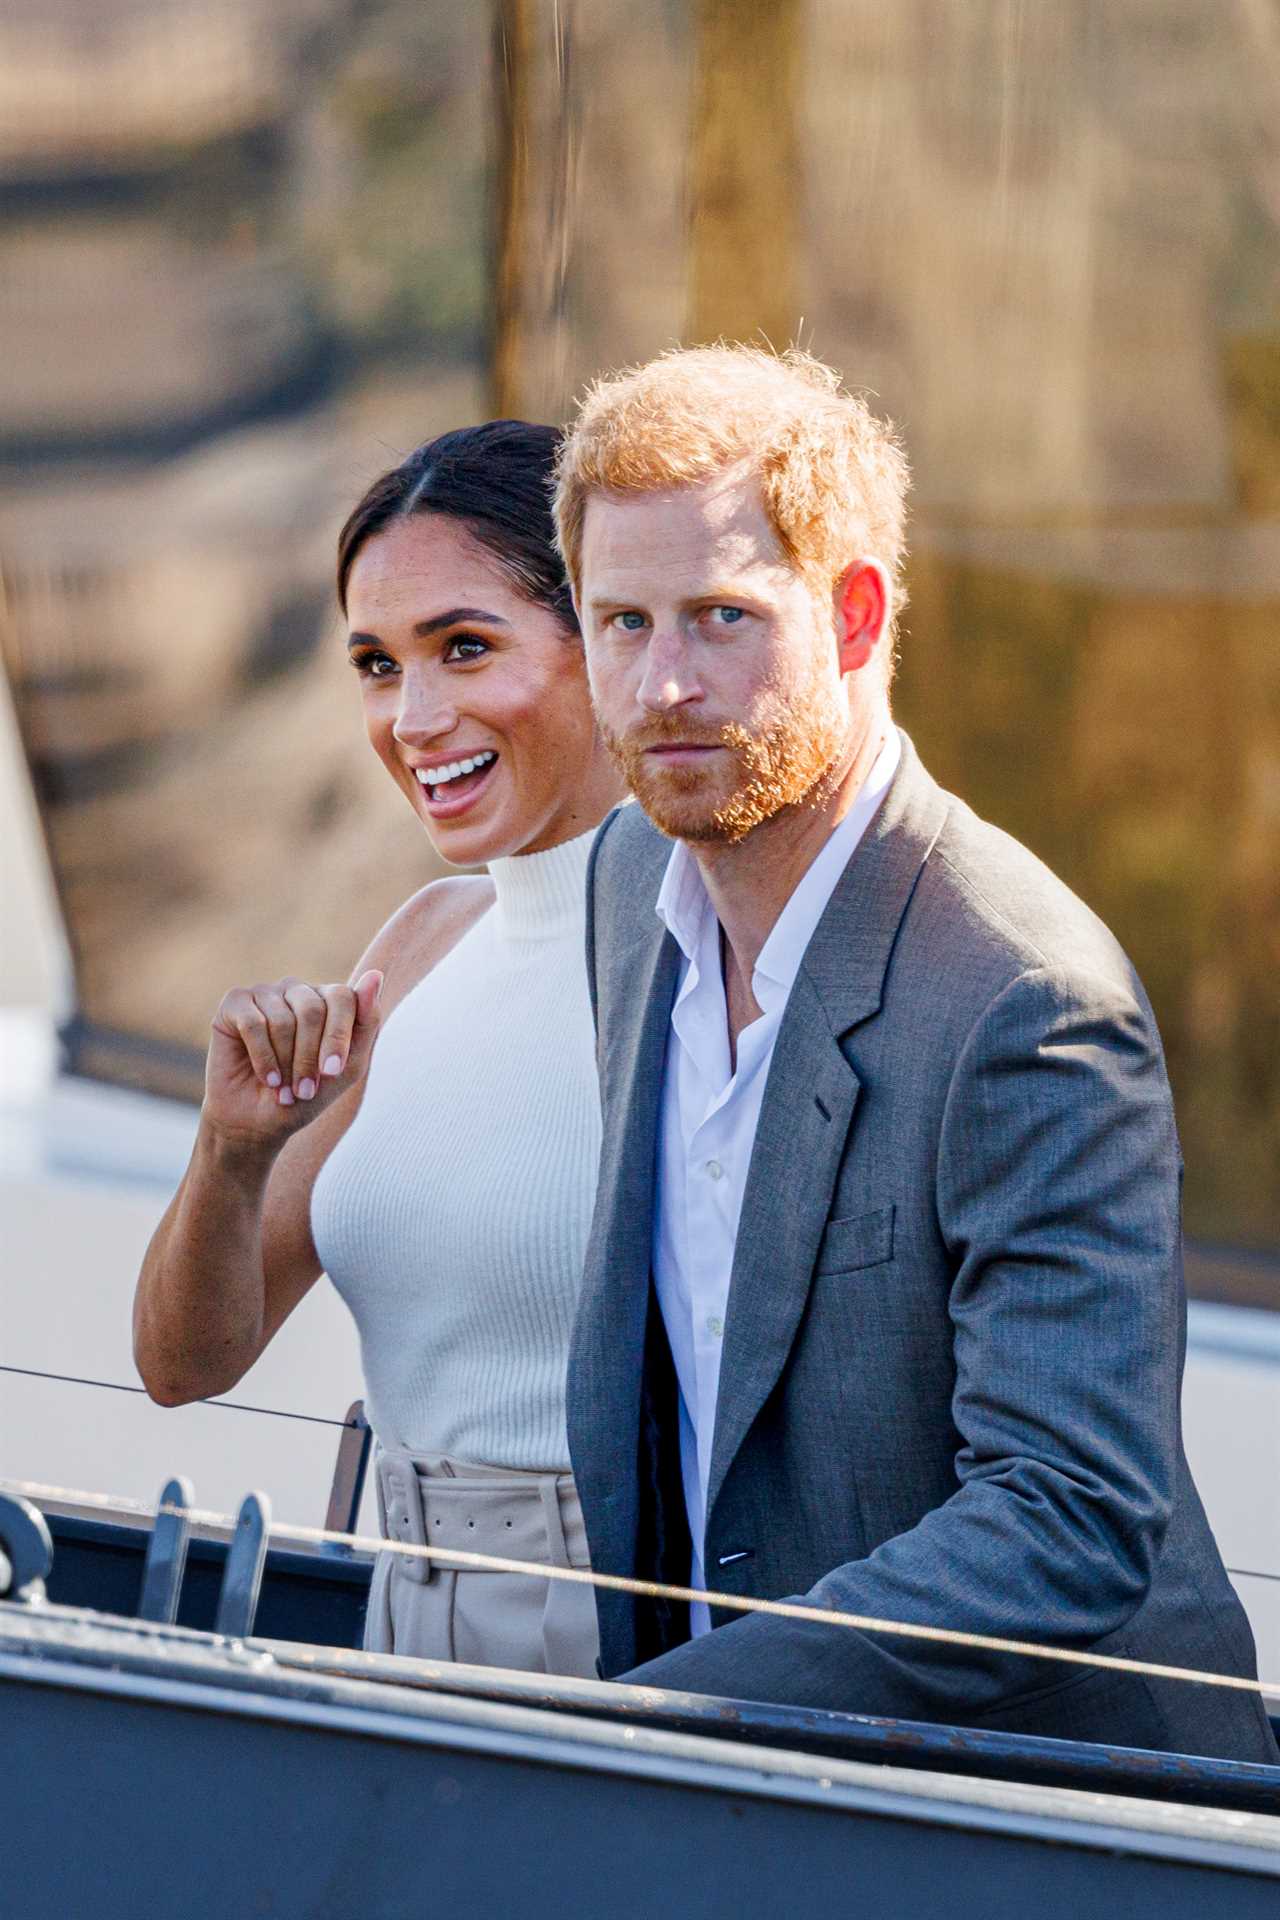 Are Meghan Markle and Prince Harry still the Duke and Duchess of Sussex?